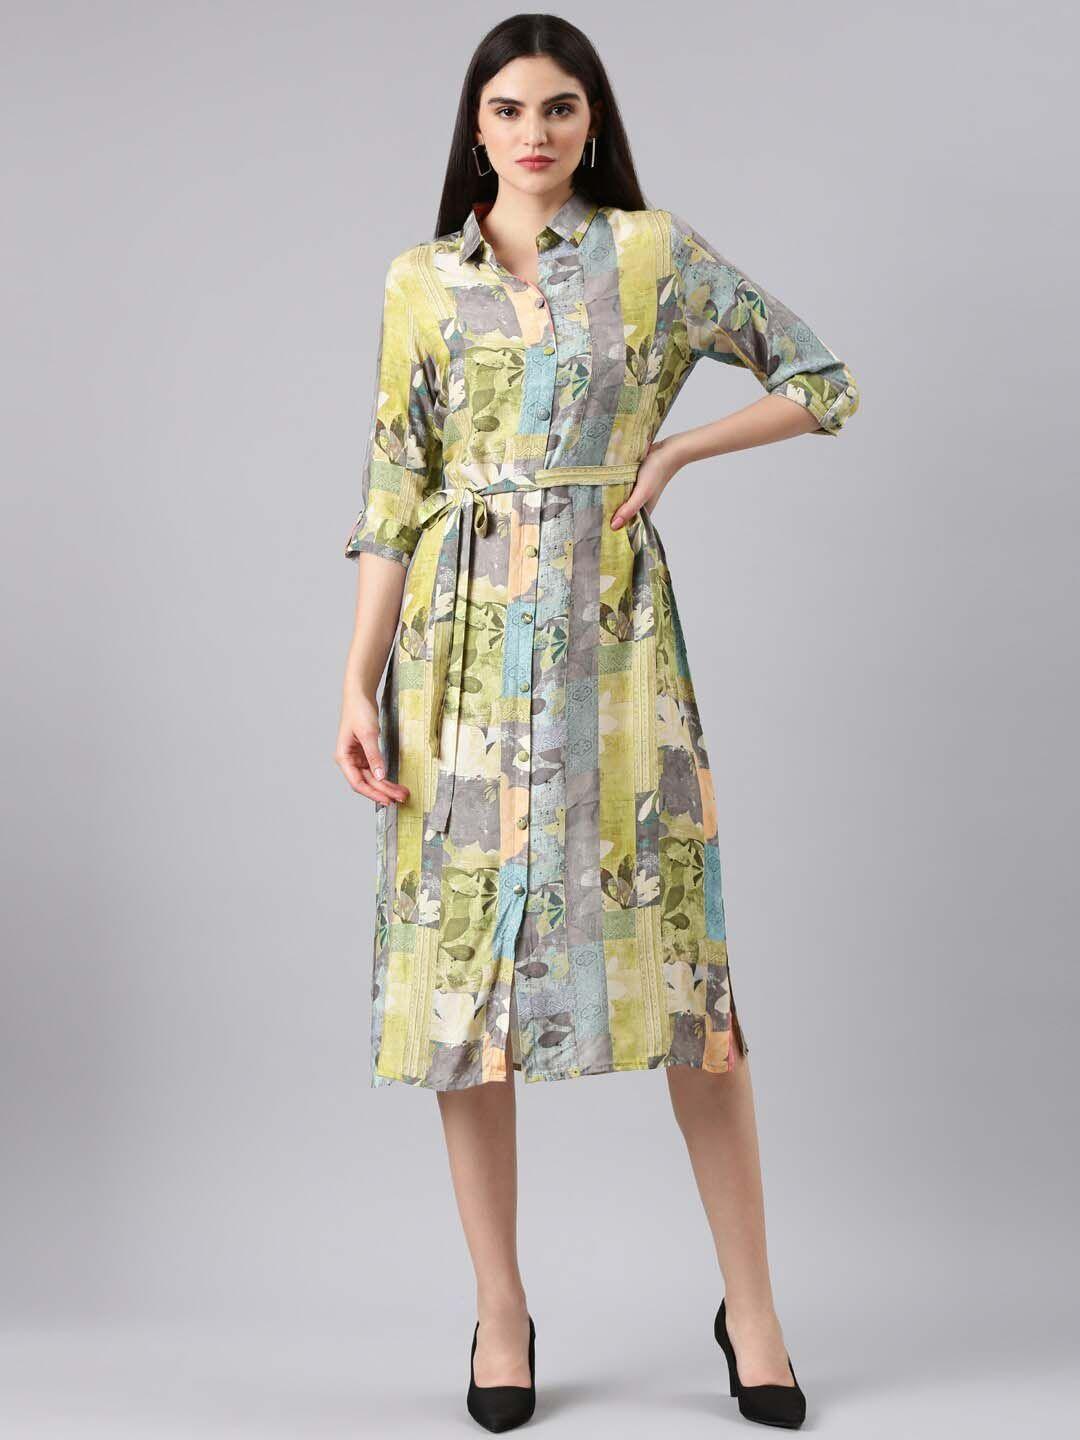 showoff-tropical-printed-belted-shirt-style-dress